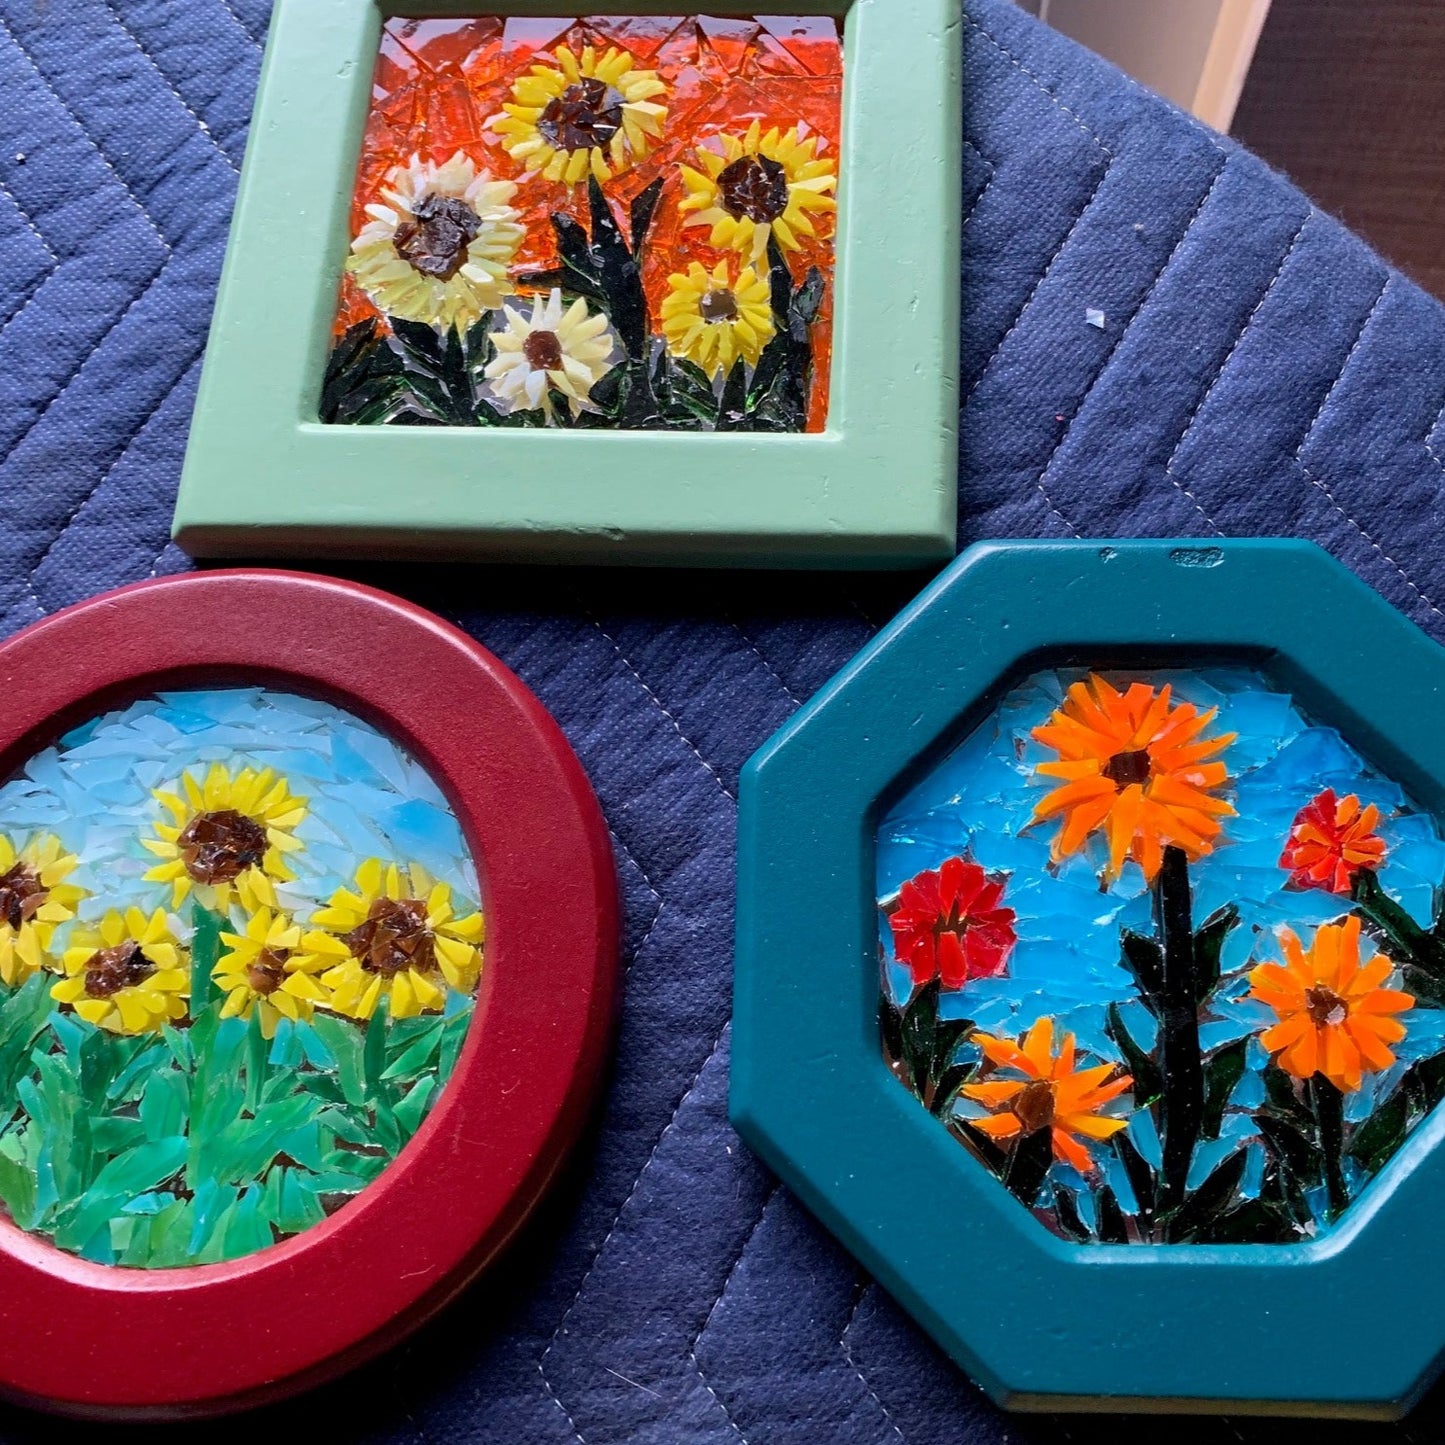 Intro to Mosaics Class with Celeste - October 7th  11:00am - 1:00pm